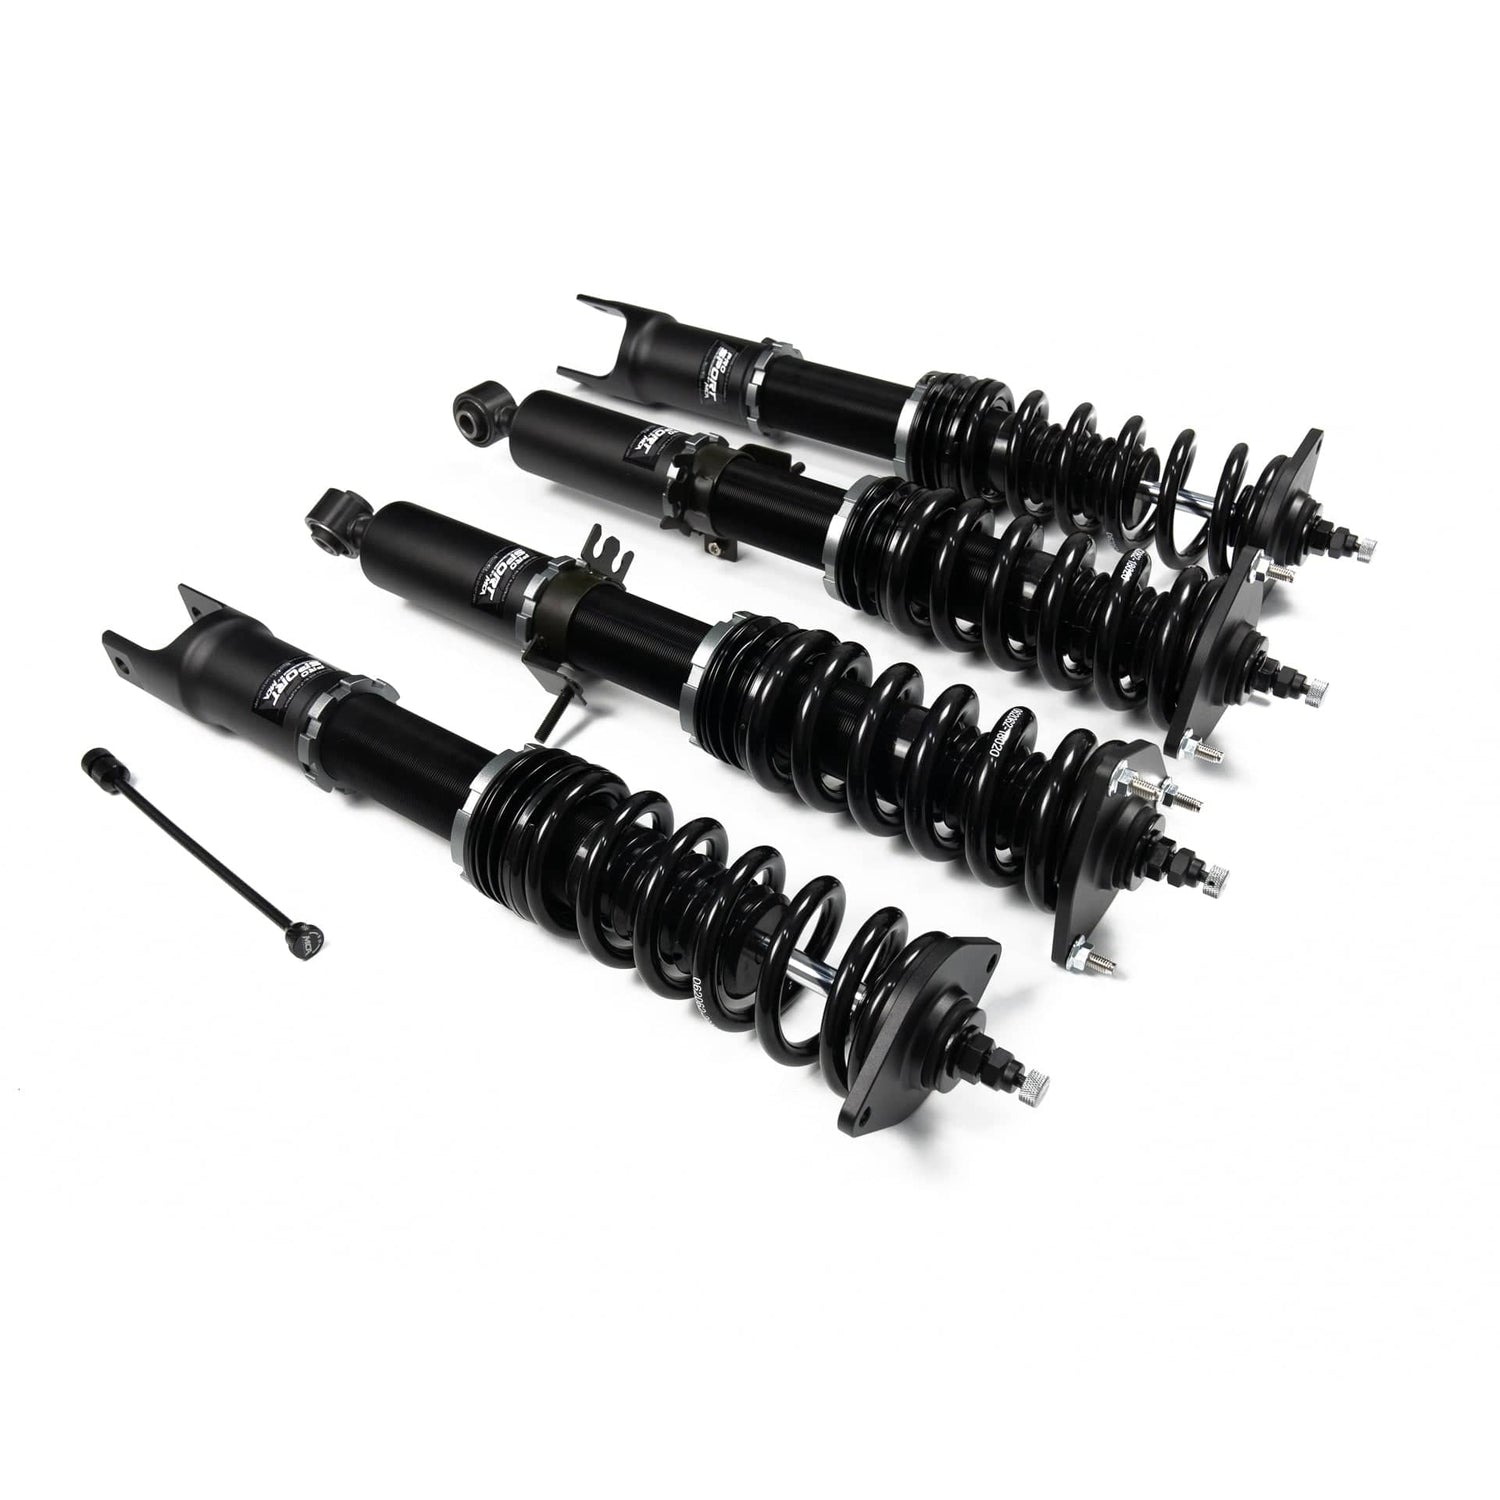 MCA Pro Sport Coilovers for 2009-2020 Nissan 370Z (Z34) NIS370-PS